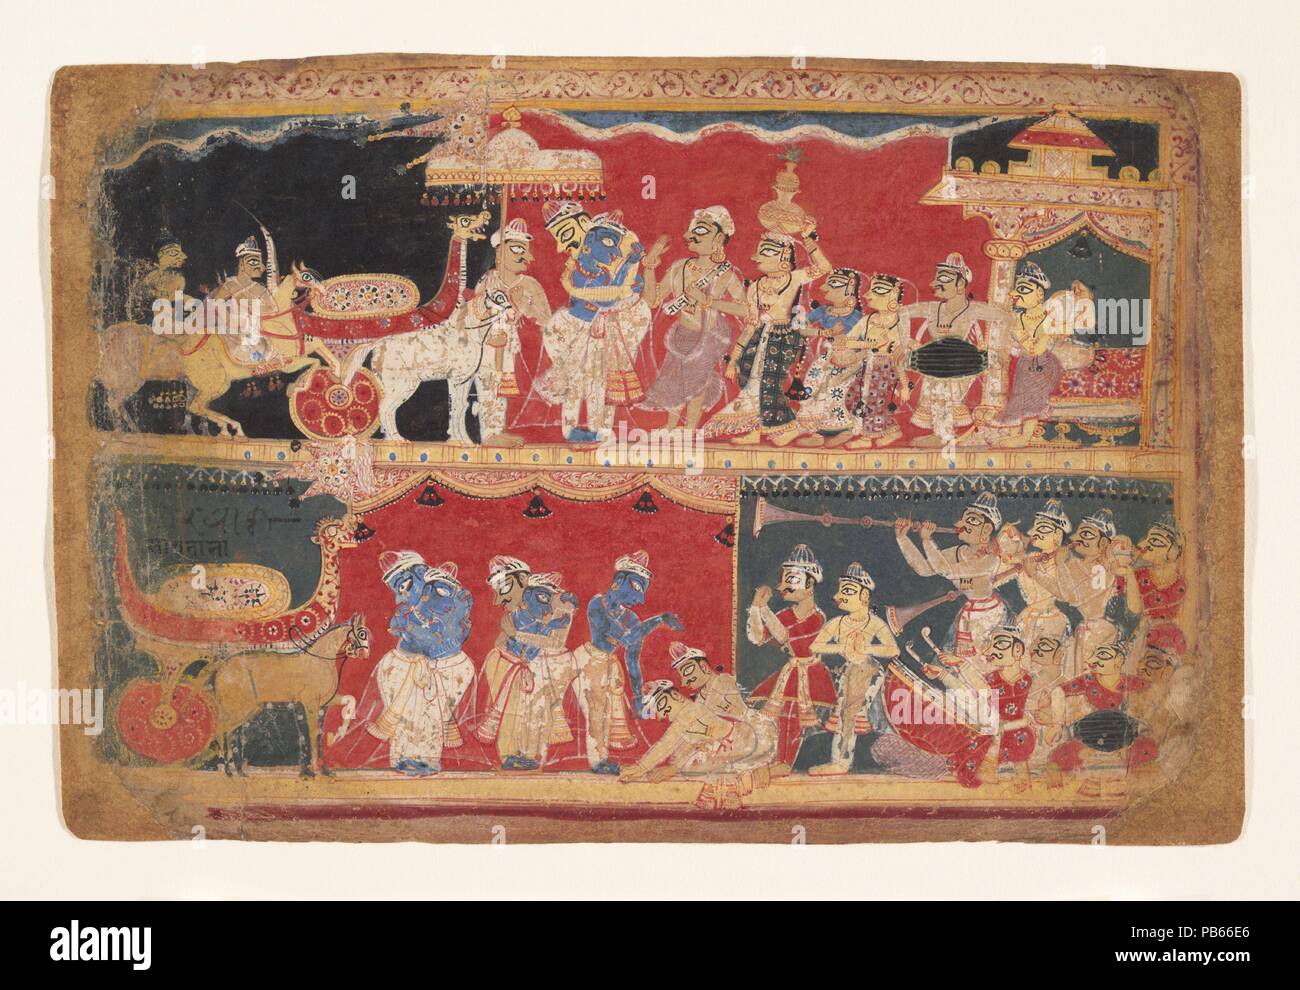 Krishna Is Welcomed into Mathura: Page from a Dispersed Bhagavata Purana Manuscript. Culture: India (Delhi Agra area). Dimensions: 6 7/16 x 9 1/8 in. (16.4 x 23.2 cm). Date: ca. 1520-40.  The upper and lower registers illustrate Krishna's entry into Mathura, where he will ultimately confront and kill the evil king Kamsa. The Bhagavata Purana describes at length the joyous welcome that he received, especially by the women of the town, who abandoned what they were doing and rushed to see him. The excitement of the moment is emphasized by the musicians in both registers and the appearance of Kris Stock Photo